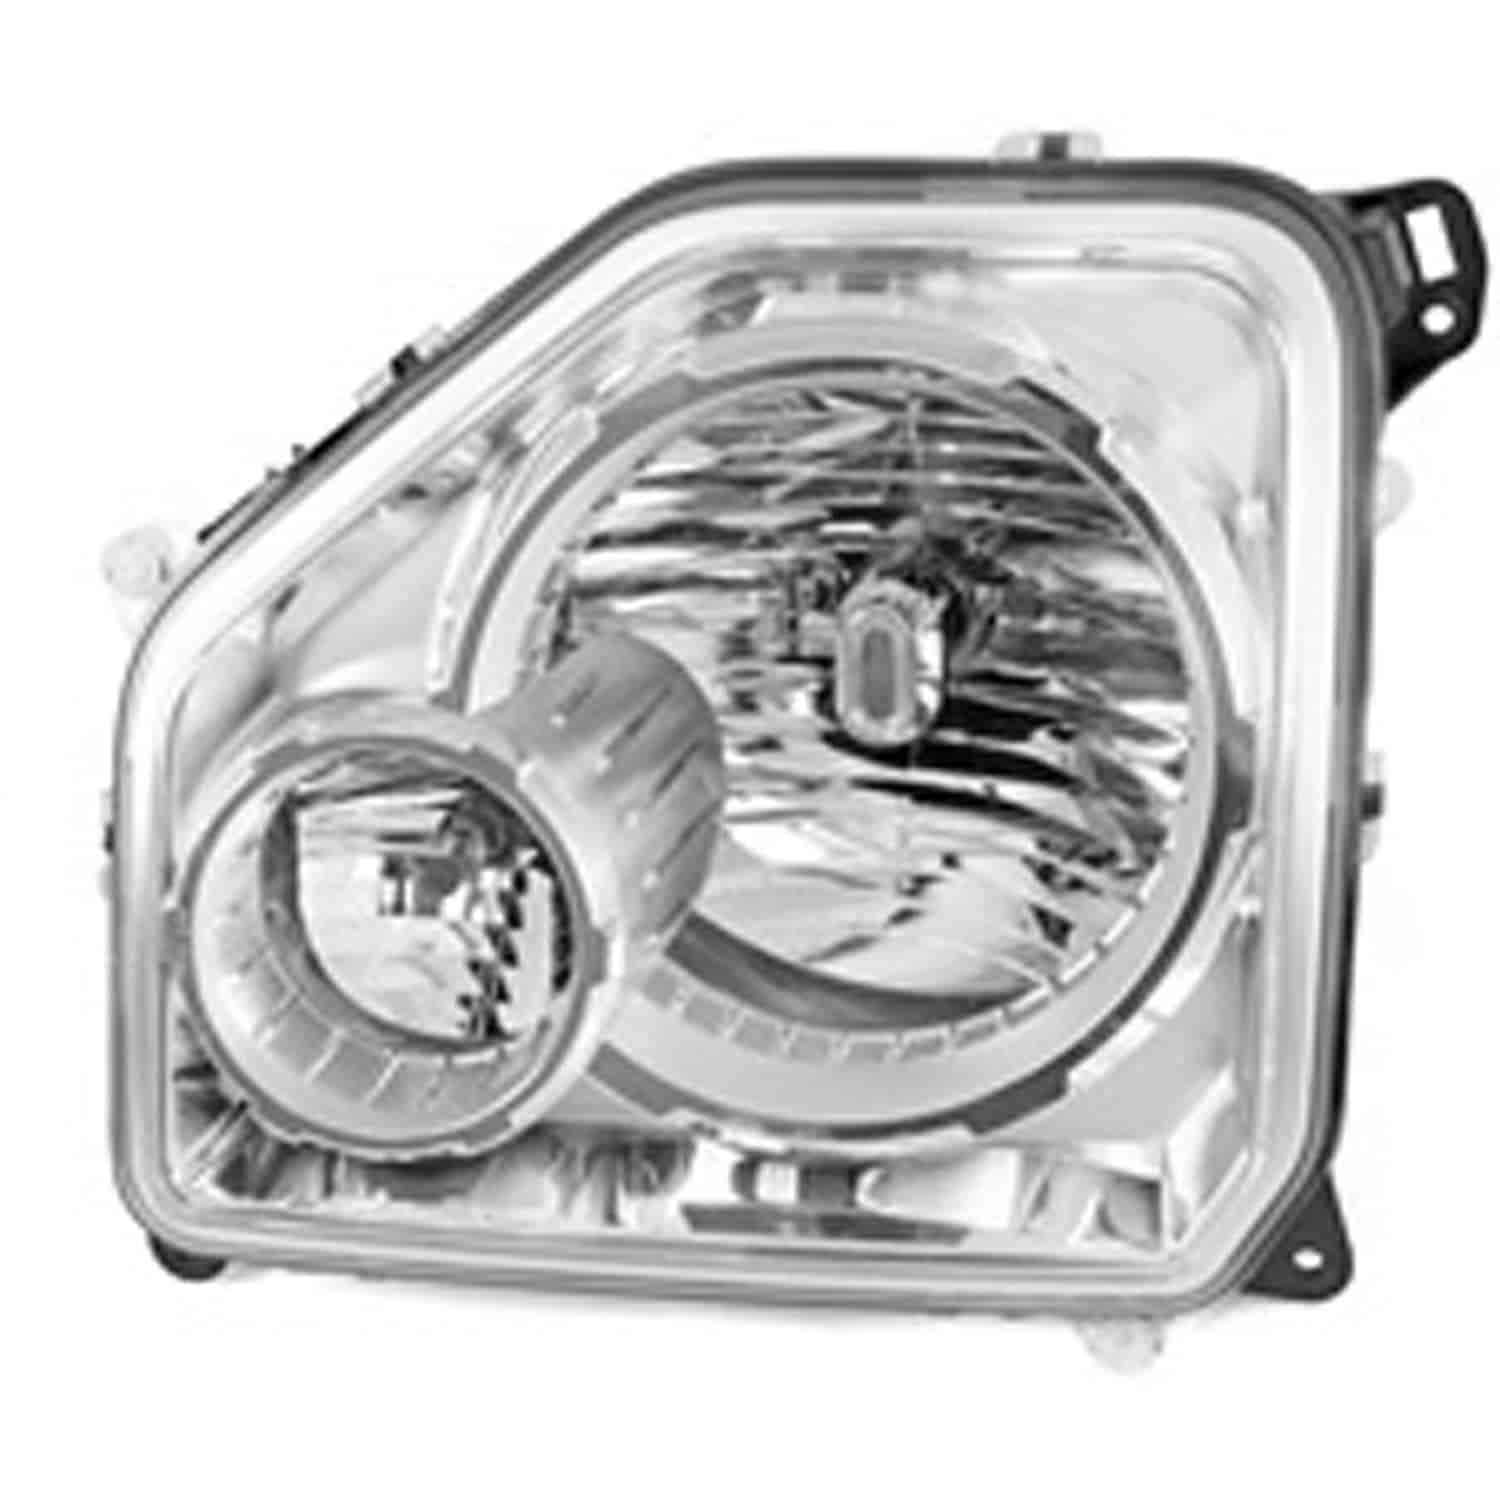 Replacement headlight assembly from Omix-ADA, Fits right side of 08-10 Jeep Liberty KKs. Thi